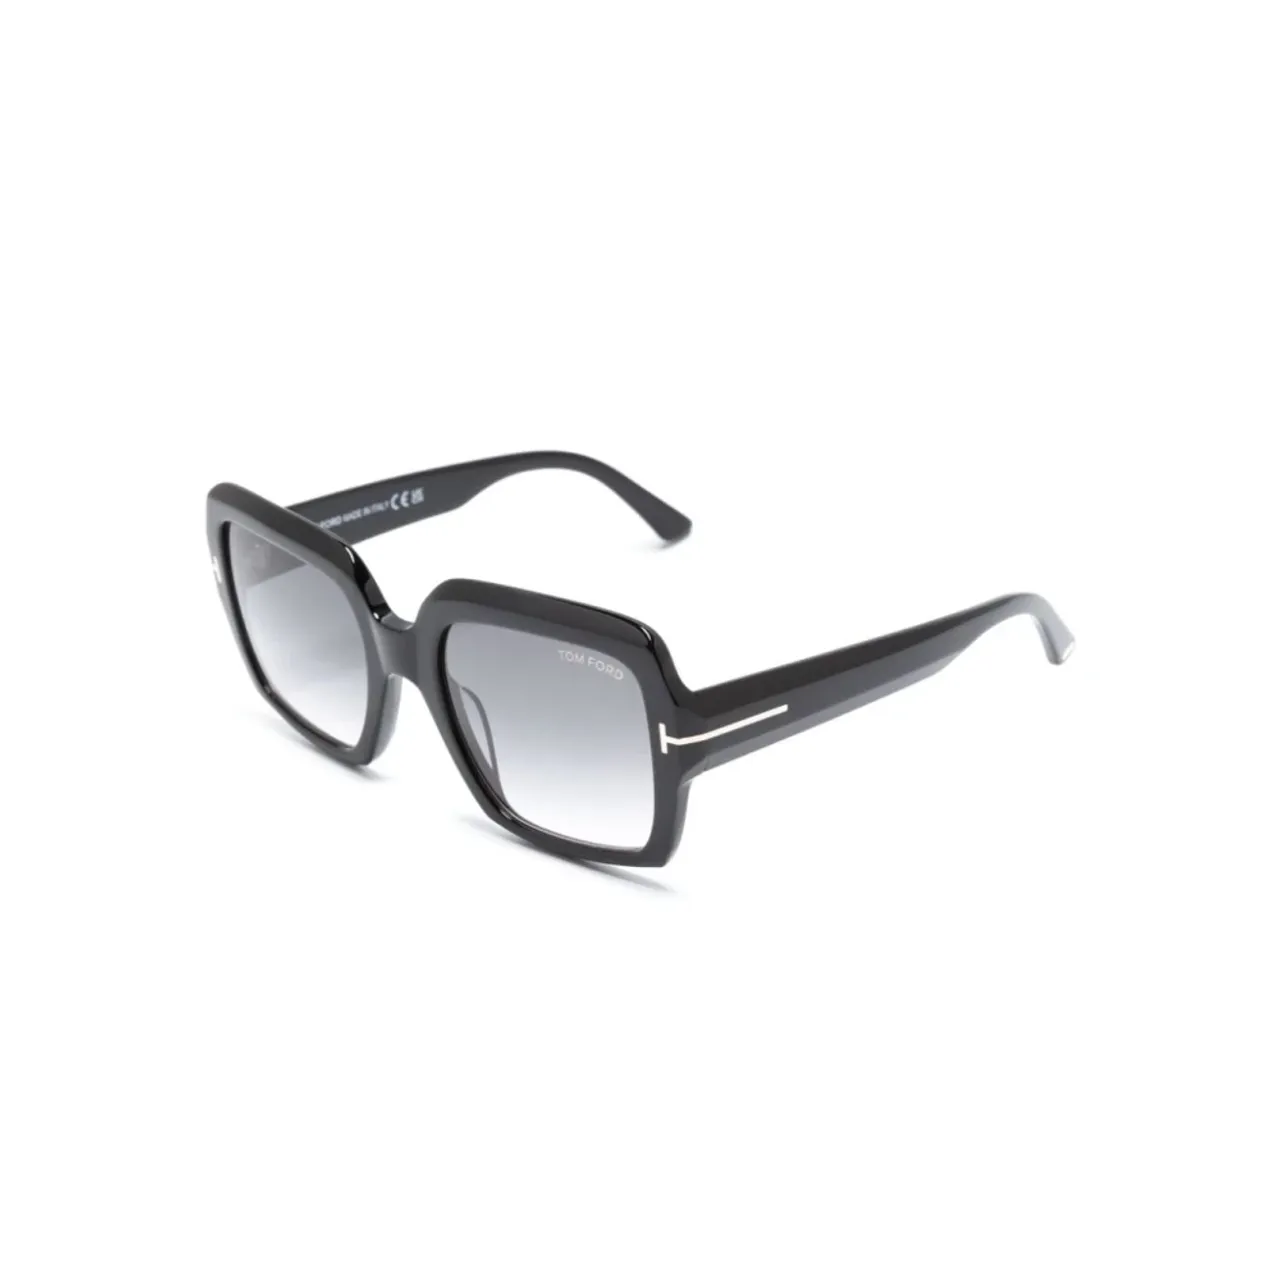 Tom Ford , Black Sungles with Accessories ,Black male, Sizes: